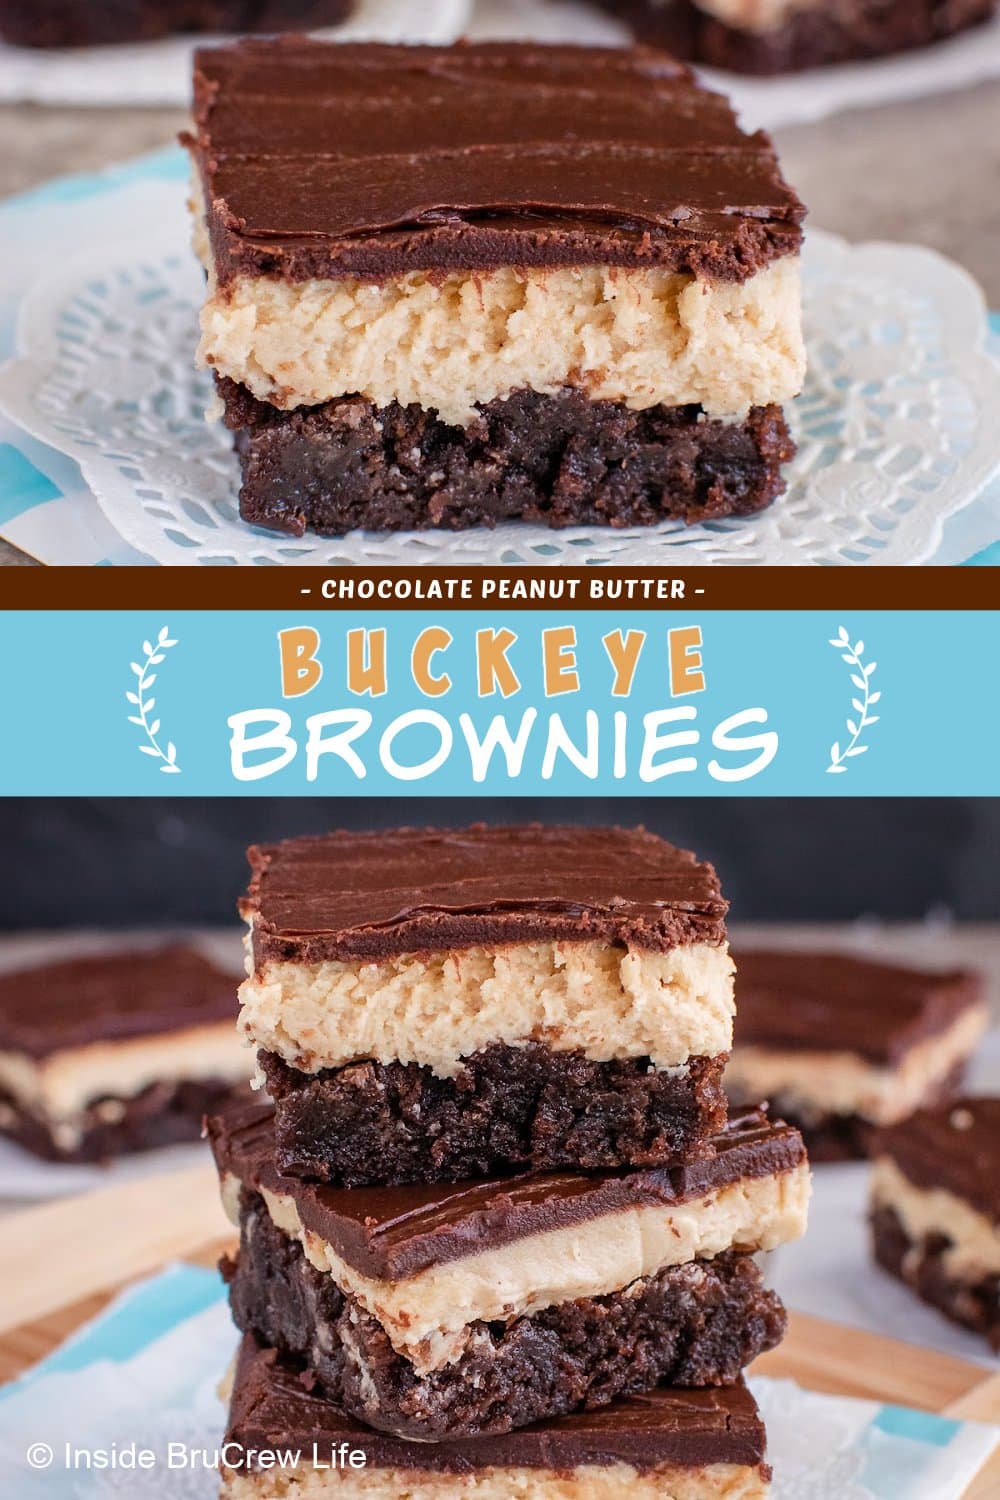 Two pictures of Buckeye brownies collaged together with a blue text box.